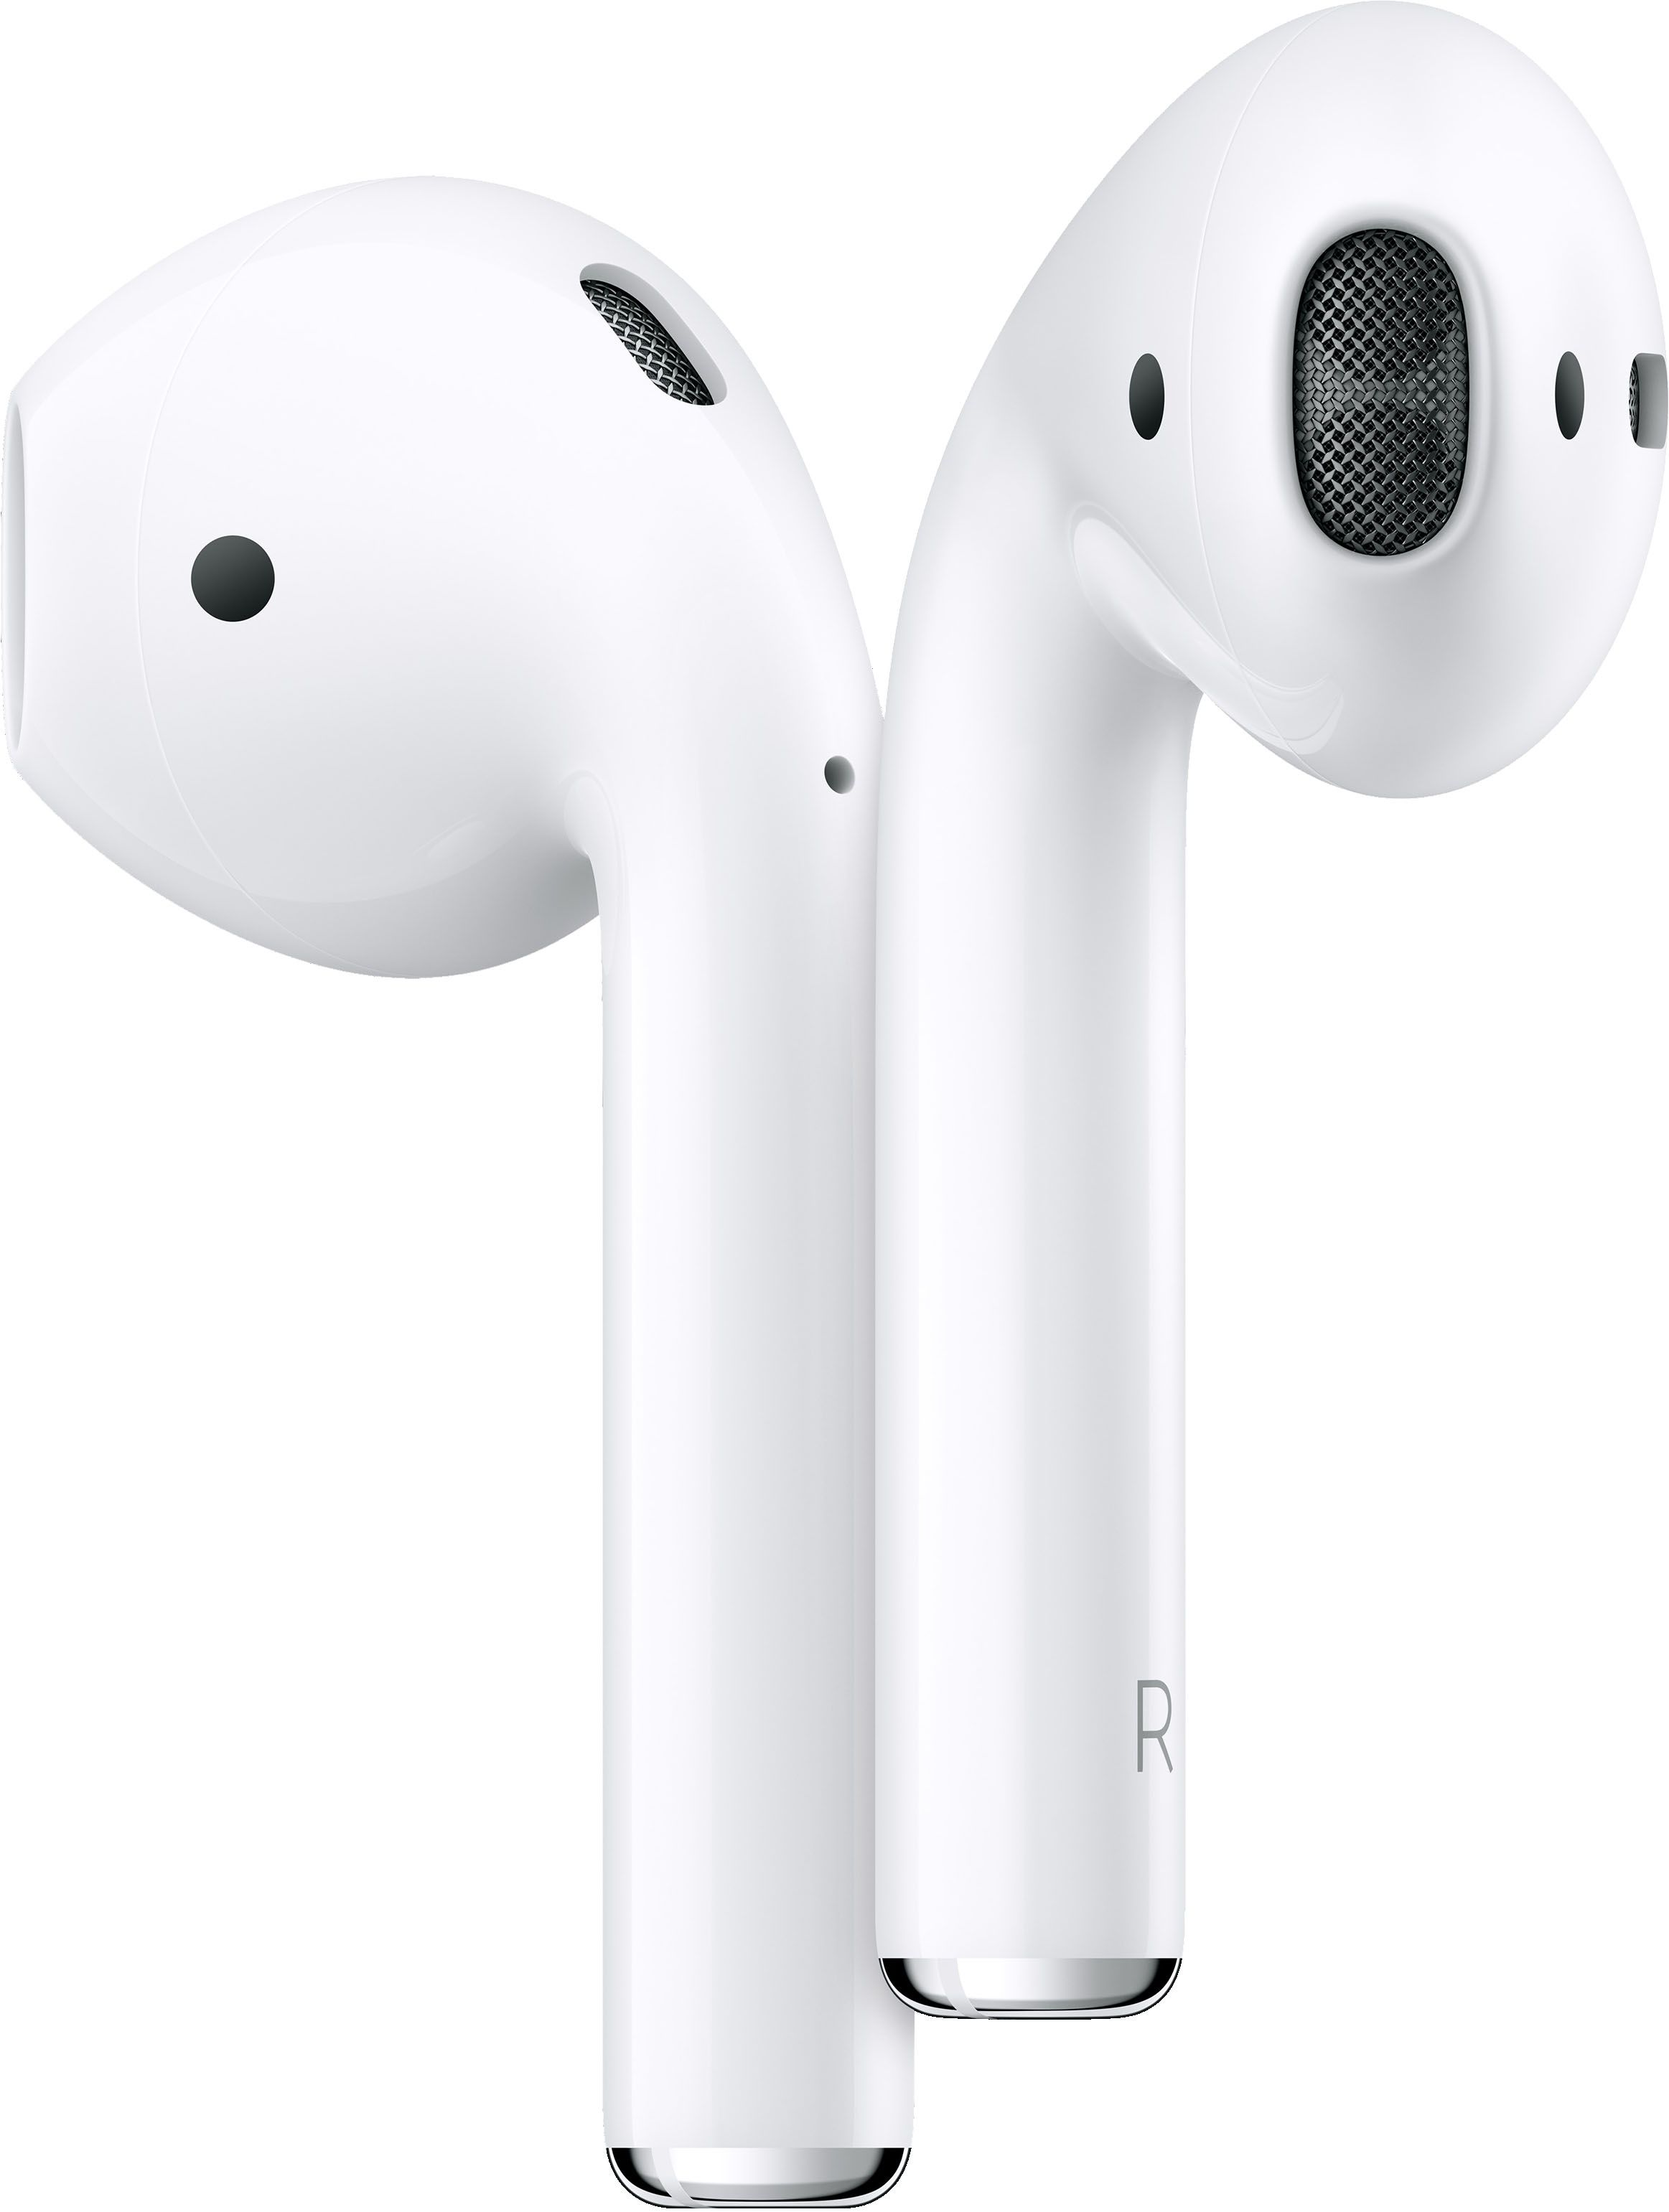 Apple AirPods with Charging Case (2nd generation) White MV7N2AM/A - Best Buy | Best Buy U.S.